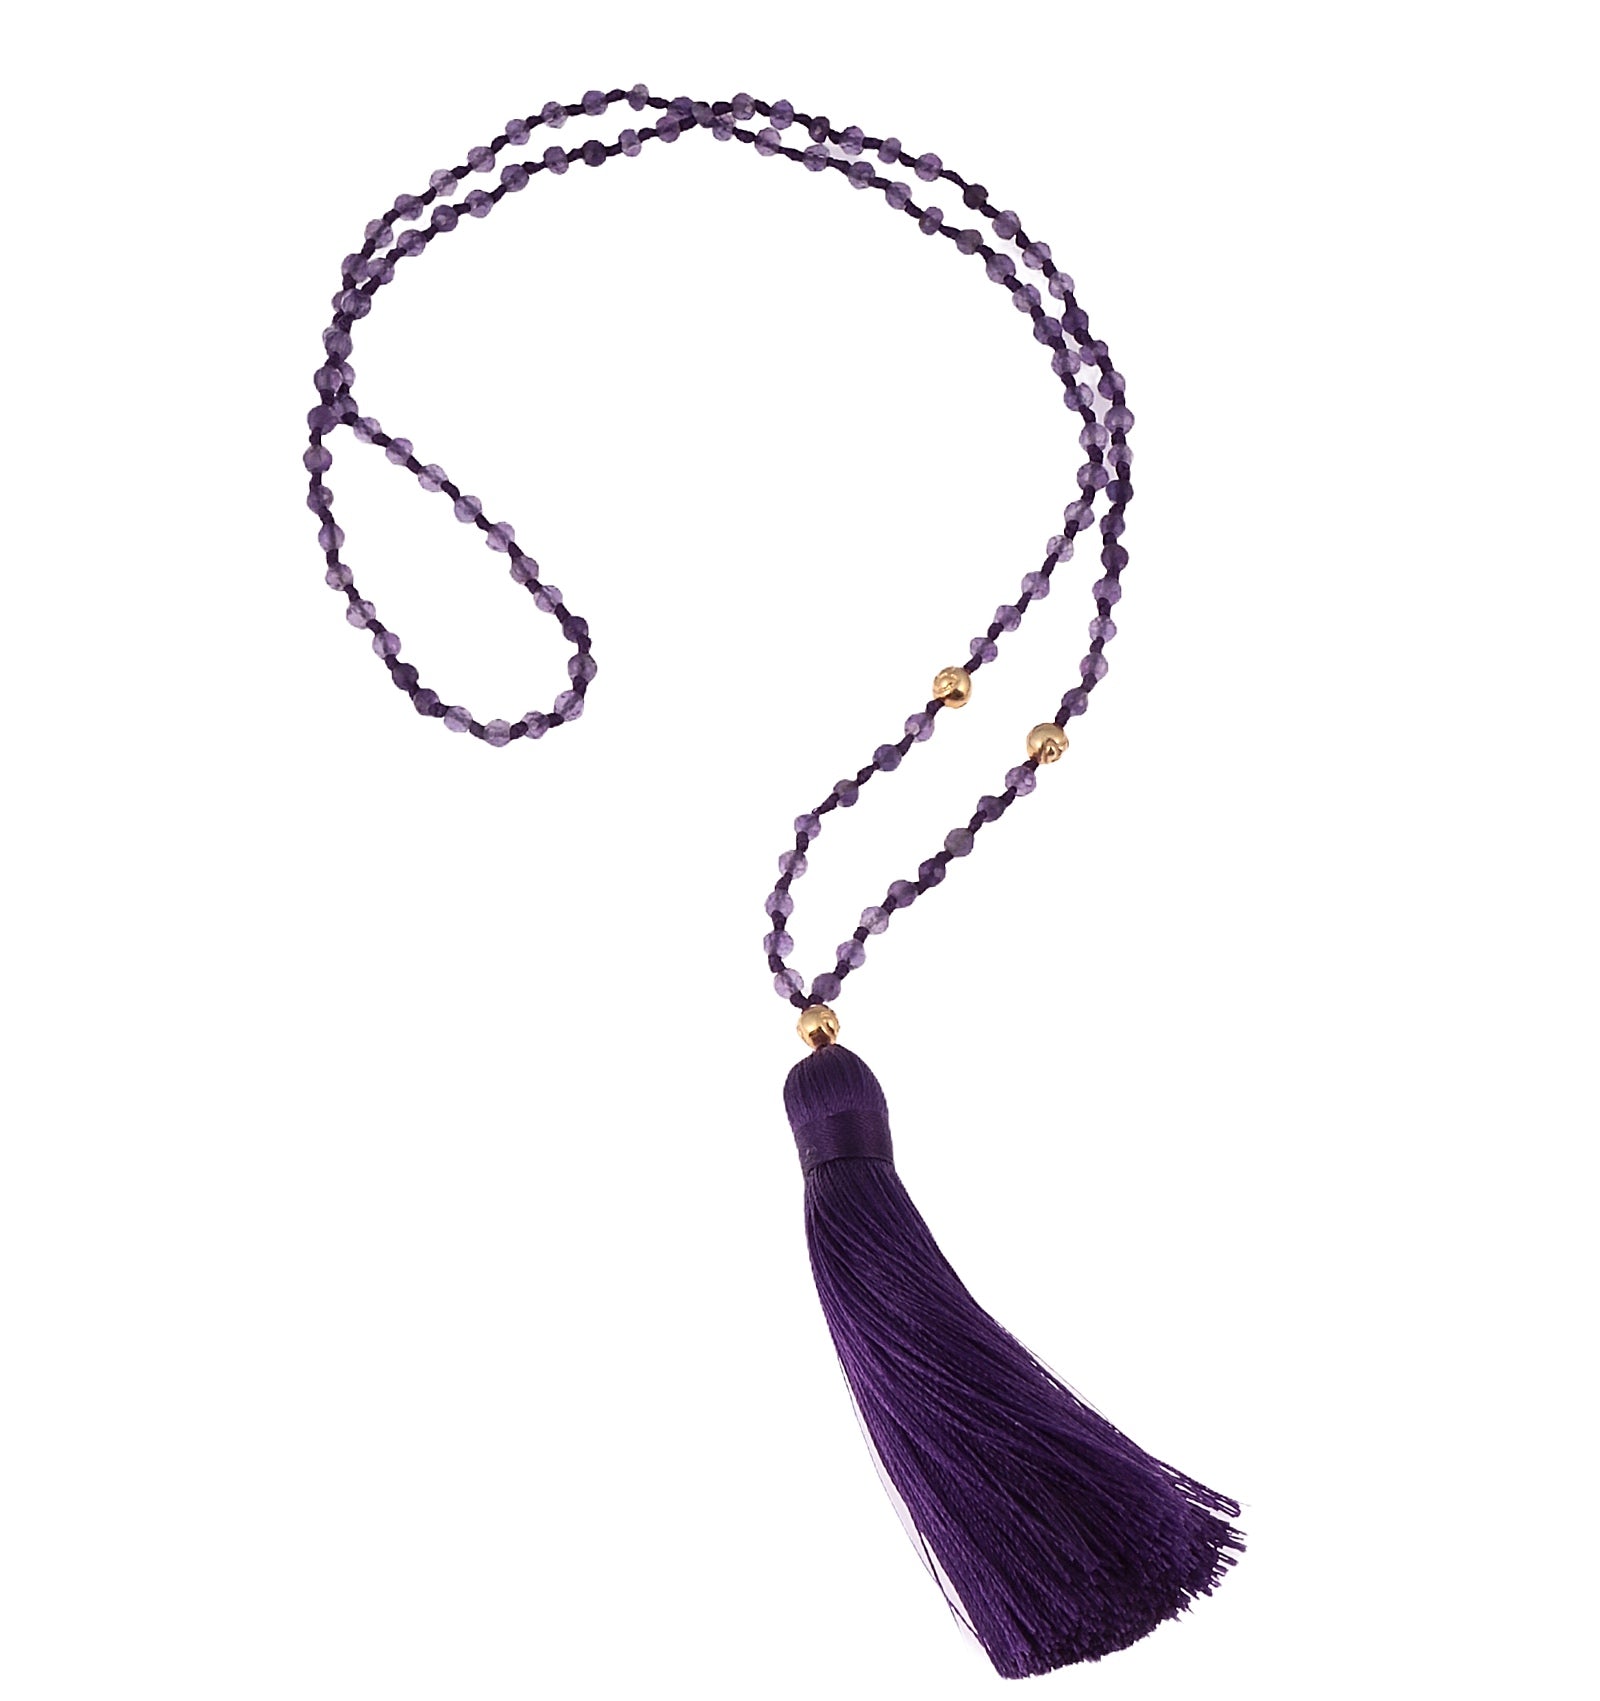 AMETHYST HANDCRAFTED MEDITATION MALA NECKLACE WITH TASSEL